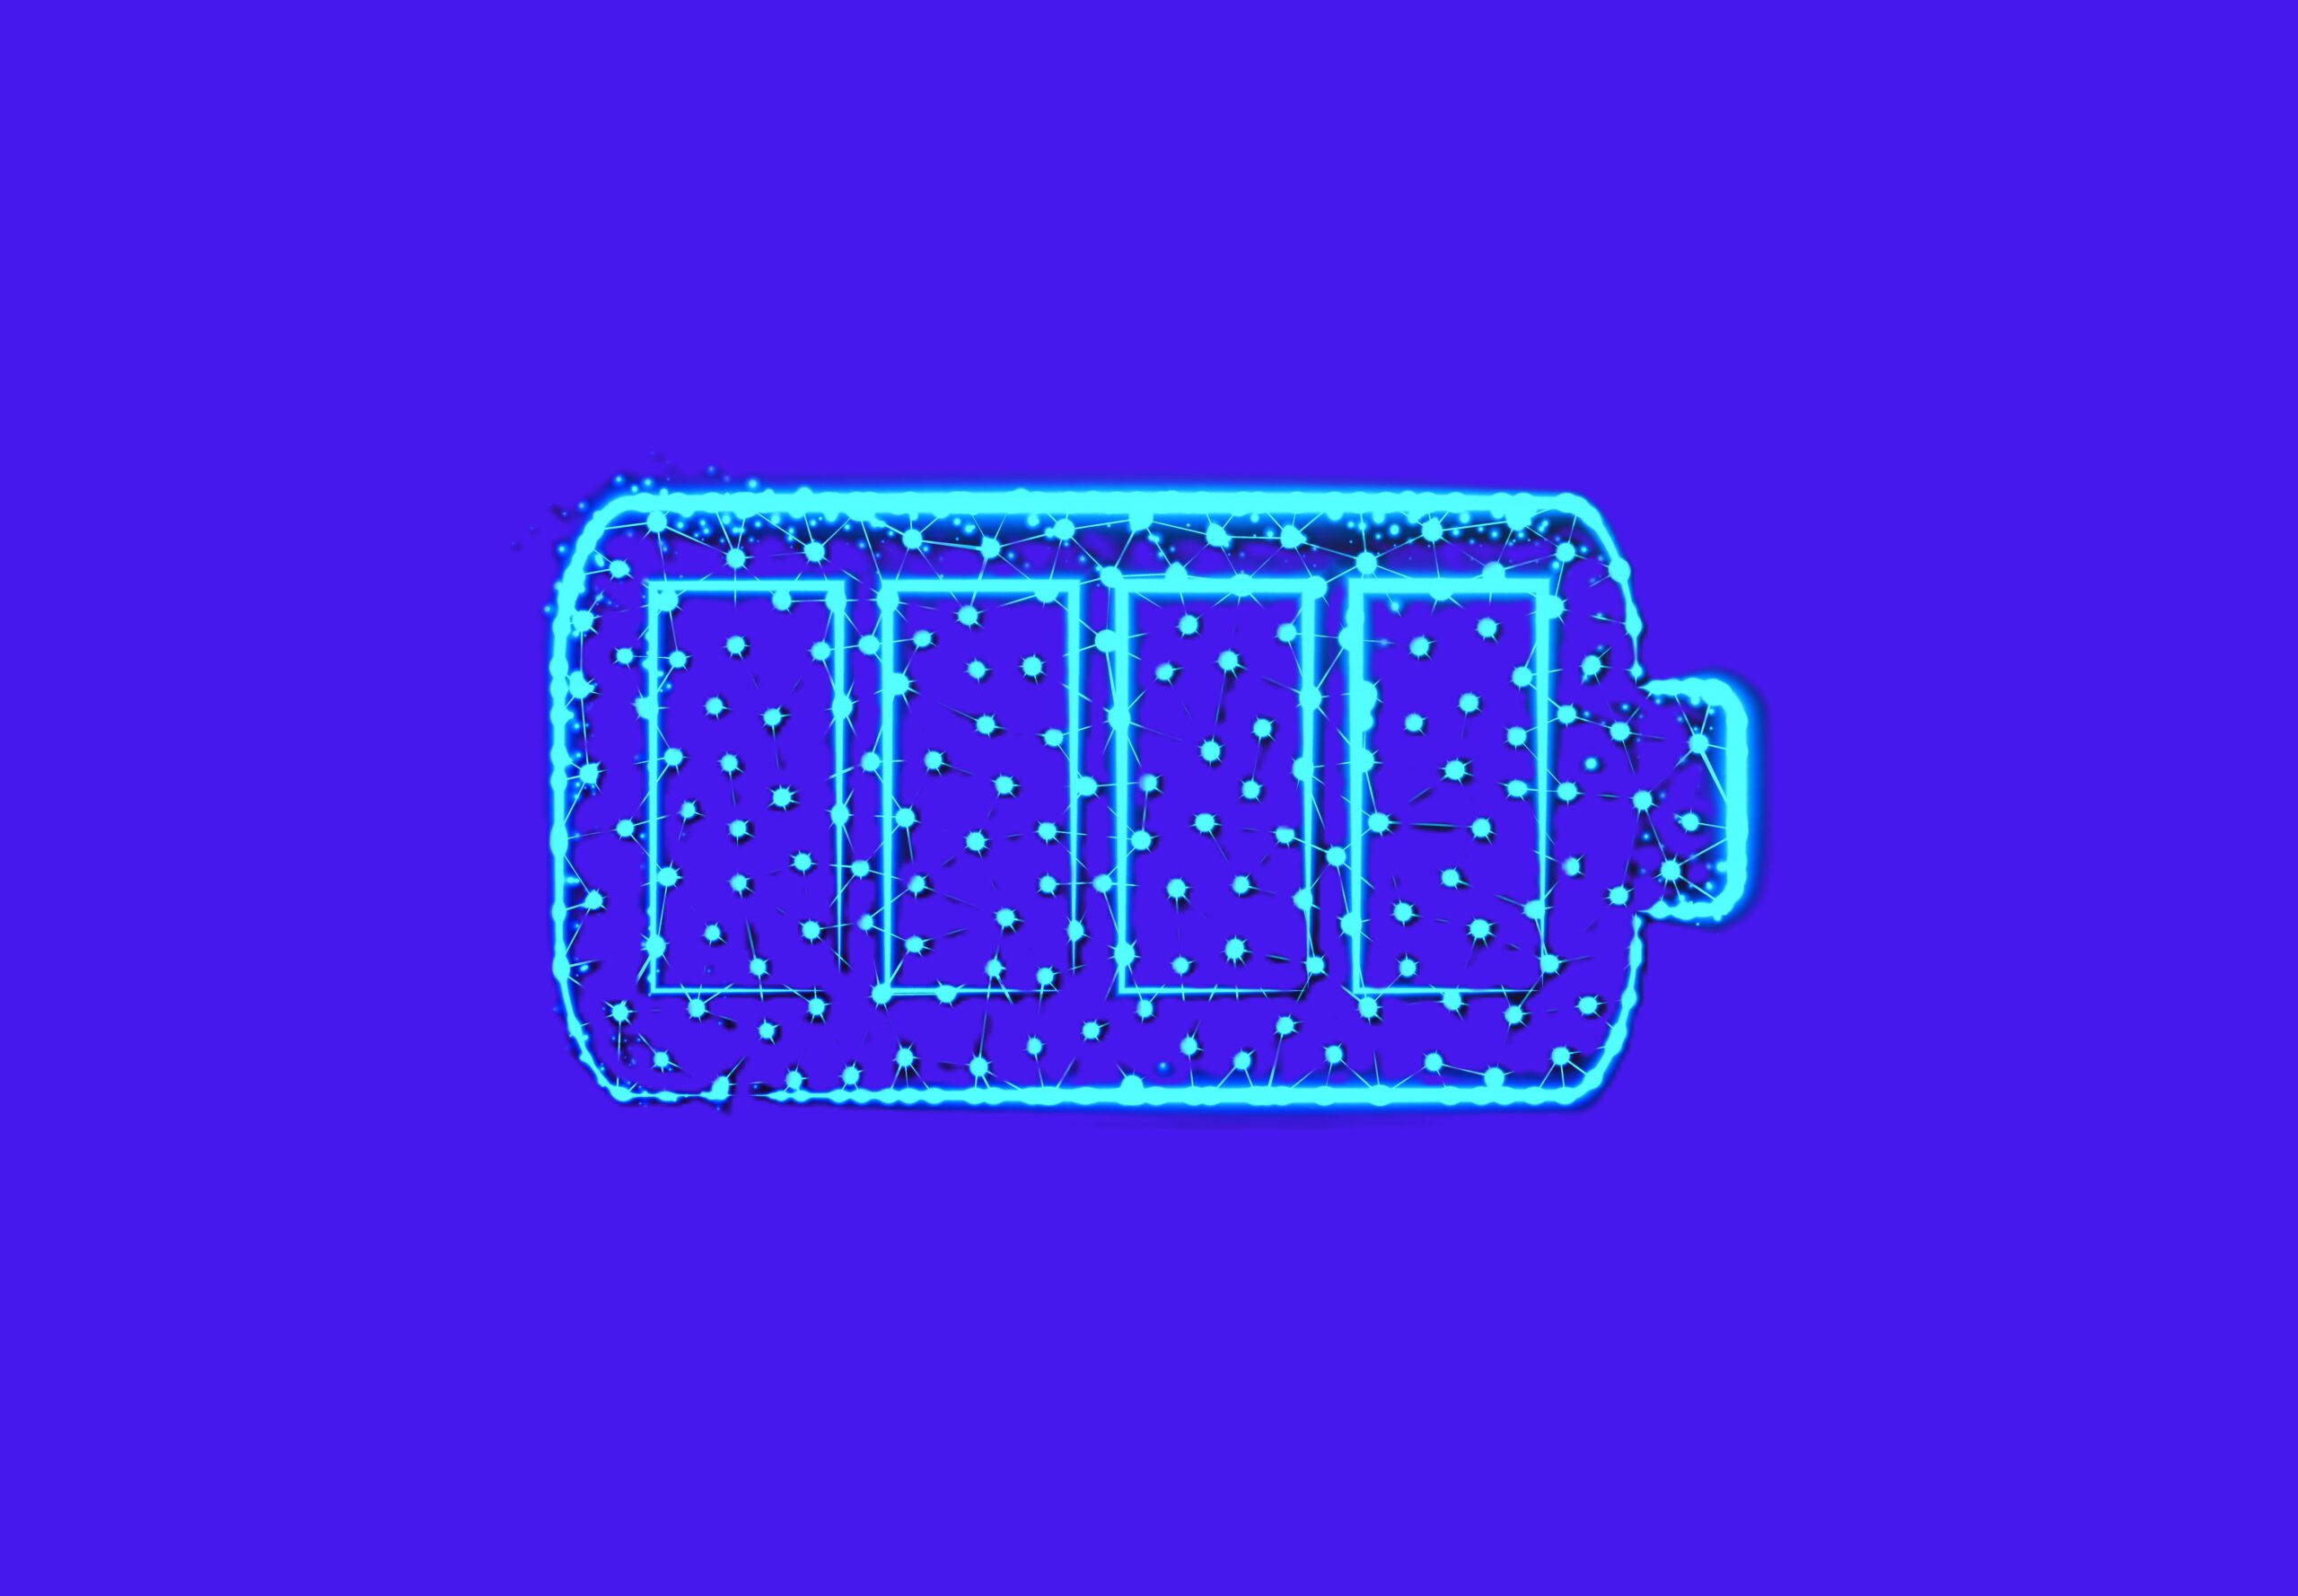 Batterie symbol single cell scaled